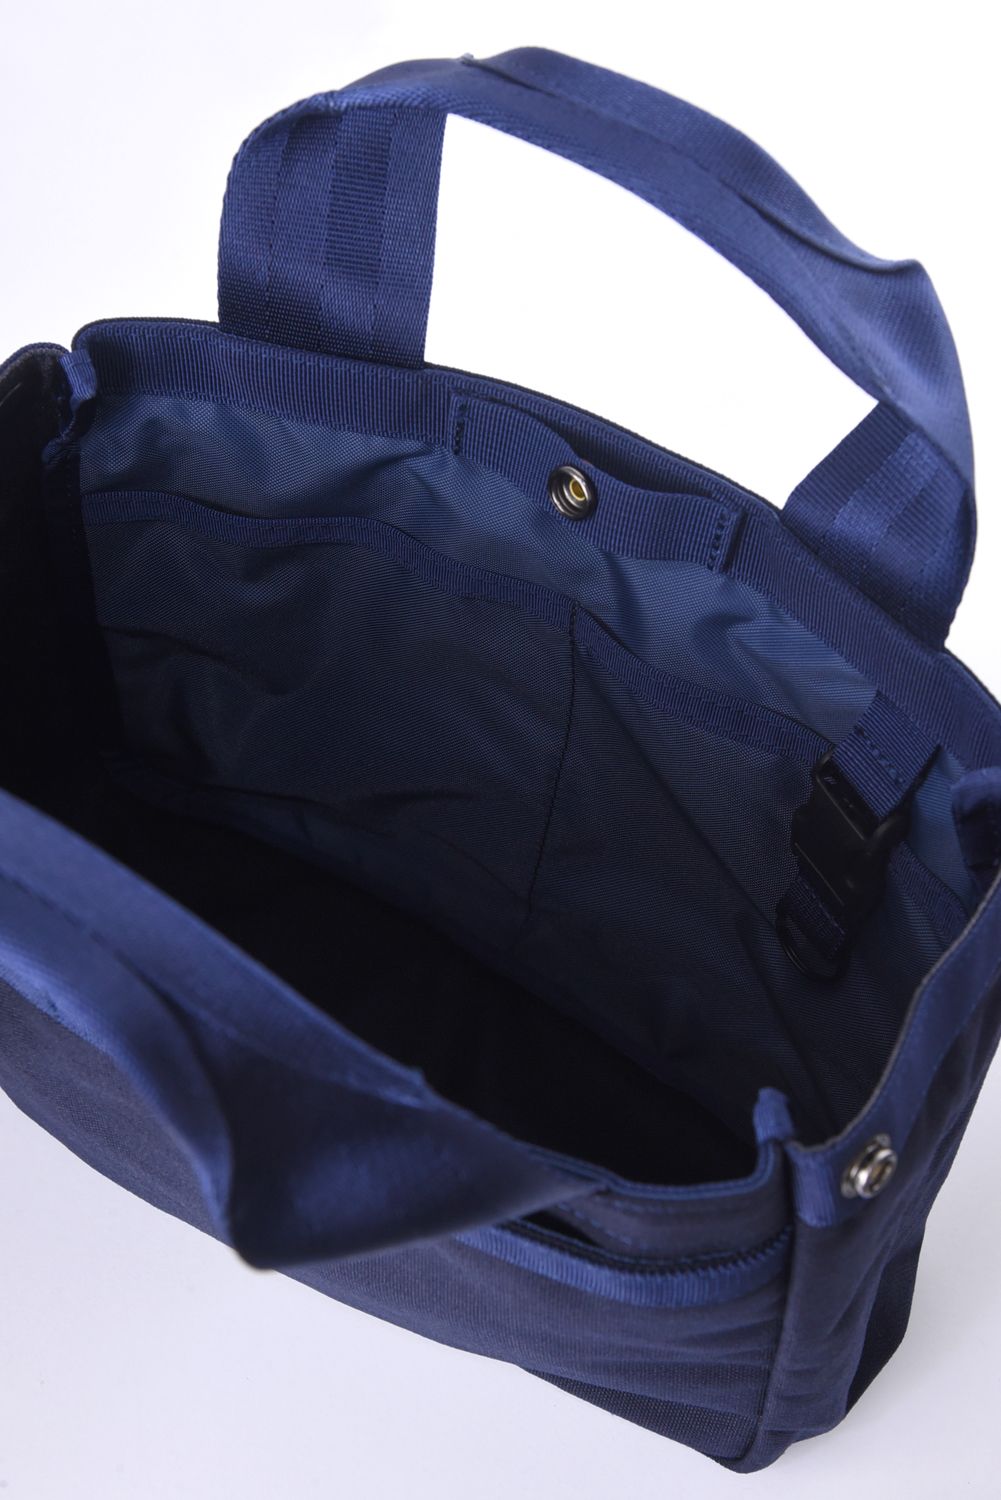 BRIEFING - 【STANDARD SERIES】 CLASSIC CART TOTE 1000D / カート 